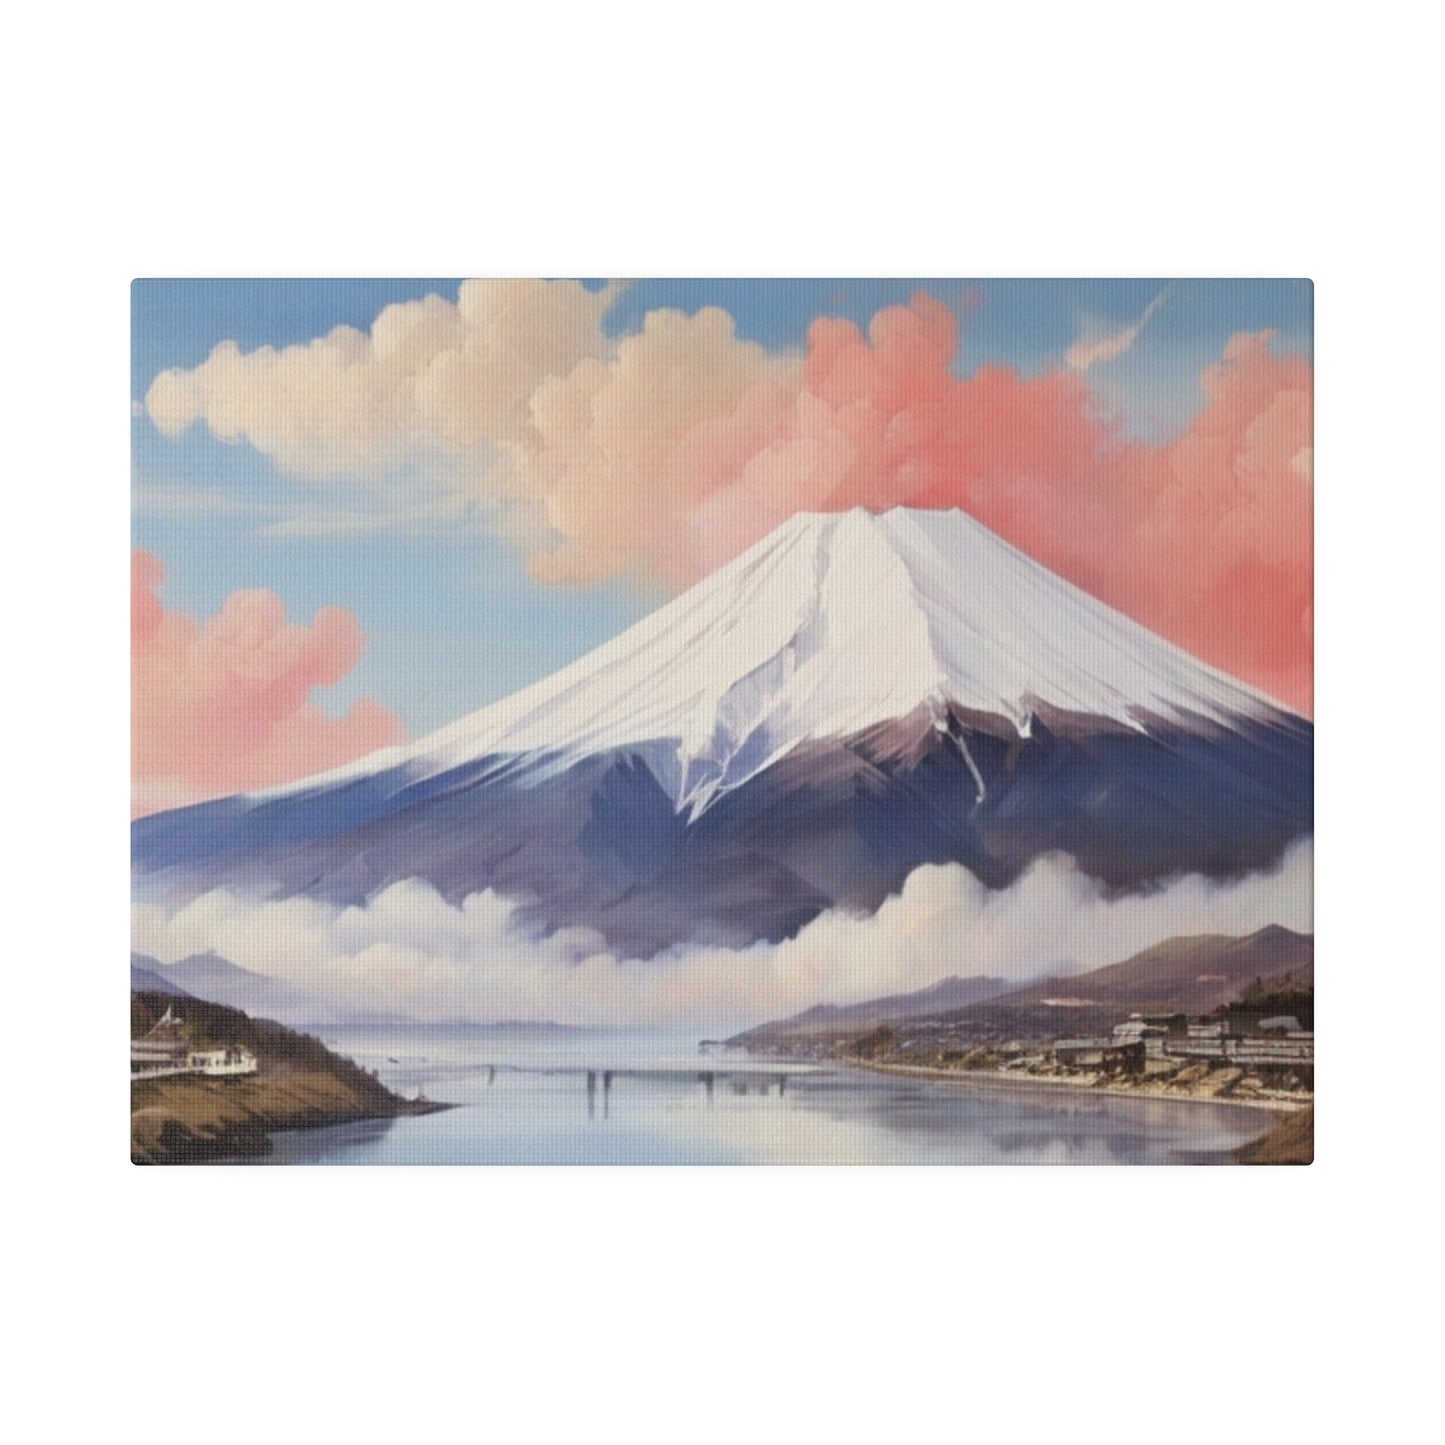 Mount Fuji Painting - Matte Canvas, Stretched, 0.75"